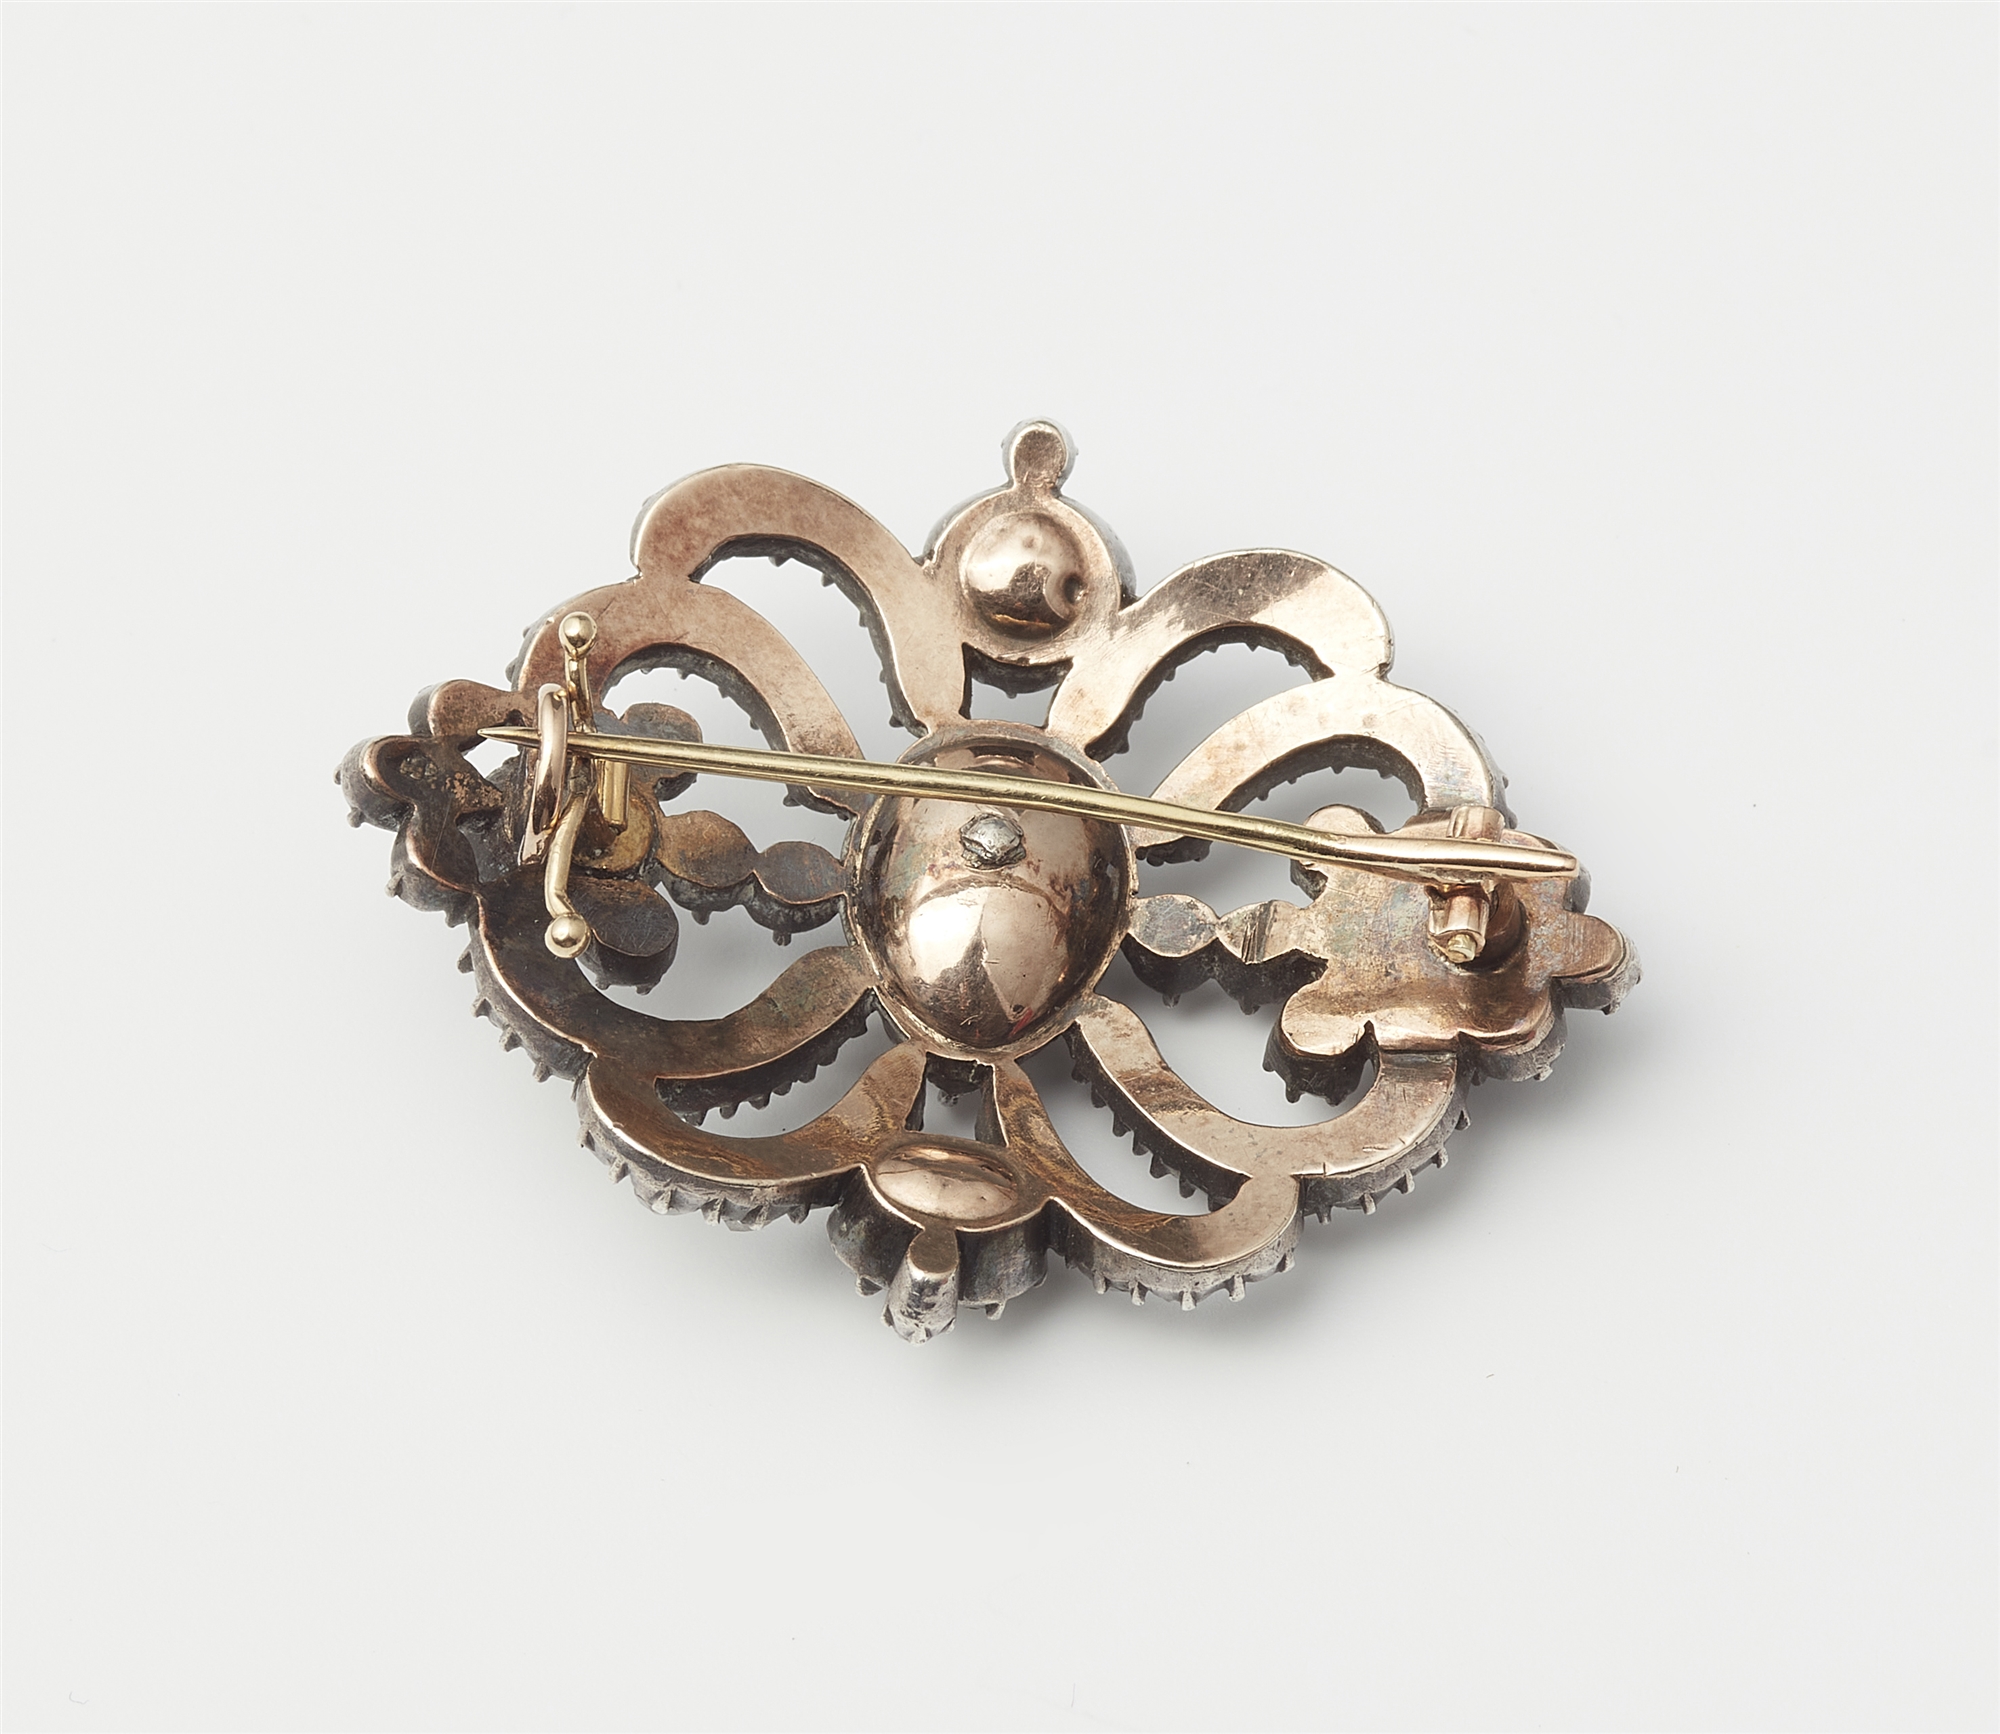 A silver 14k gold and foiled rose-cut diamond brooch. - Image 2 of 2